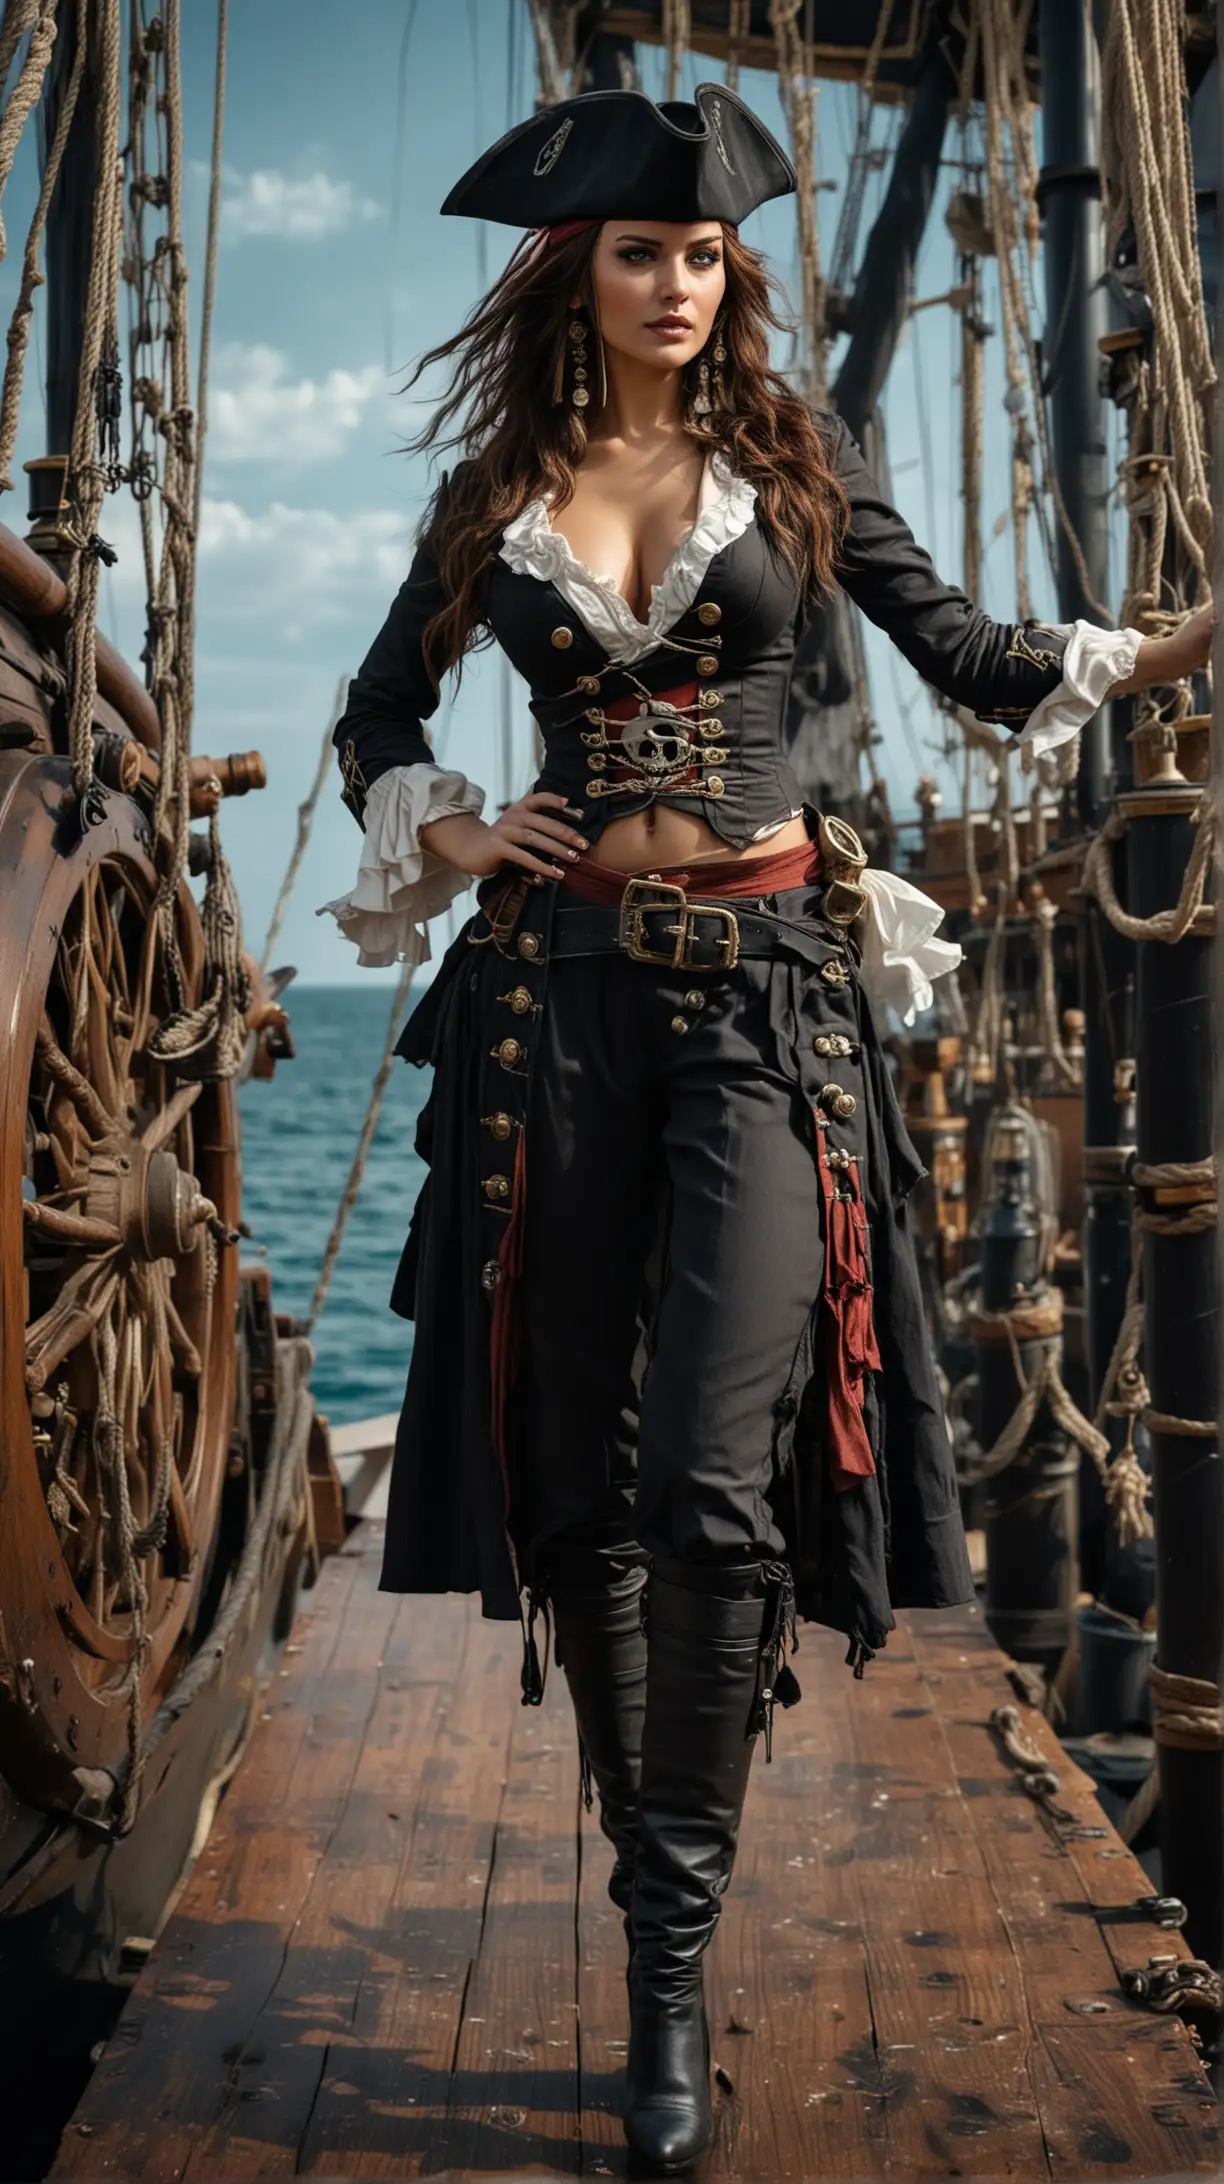 A length image fullbody photography realistic cinematic color beautiful russia super model woman busty in a luxury black jack Sparrow pirates uniform,sensual sweet pose,sail ship pirate background